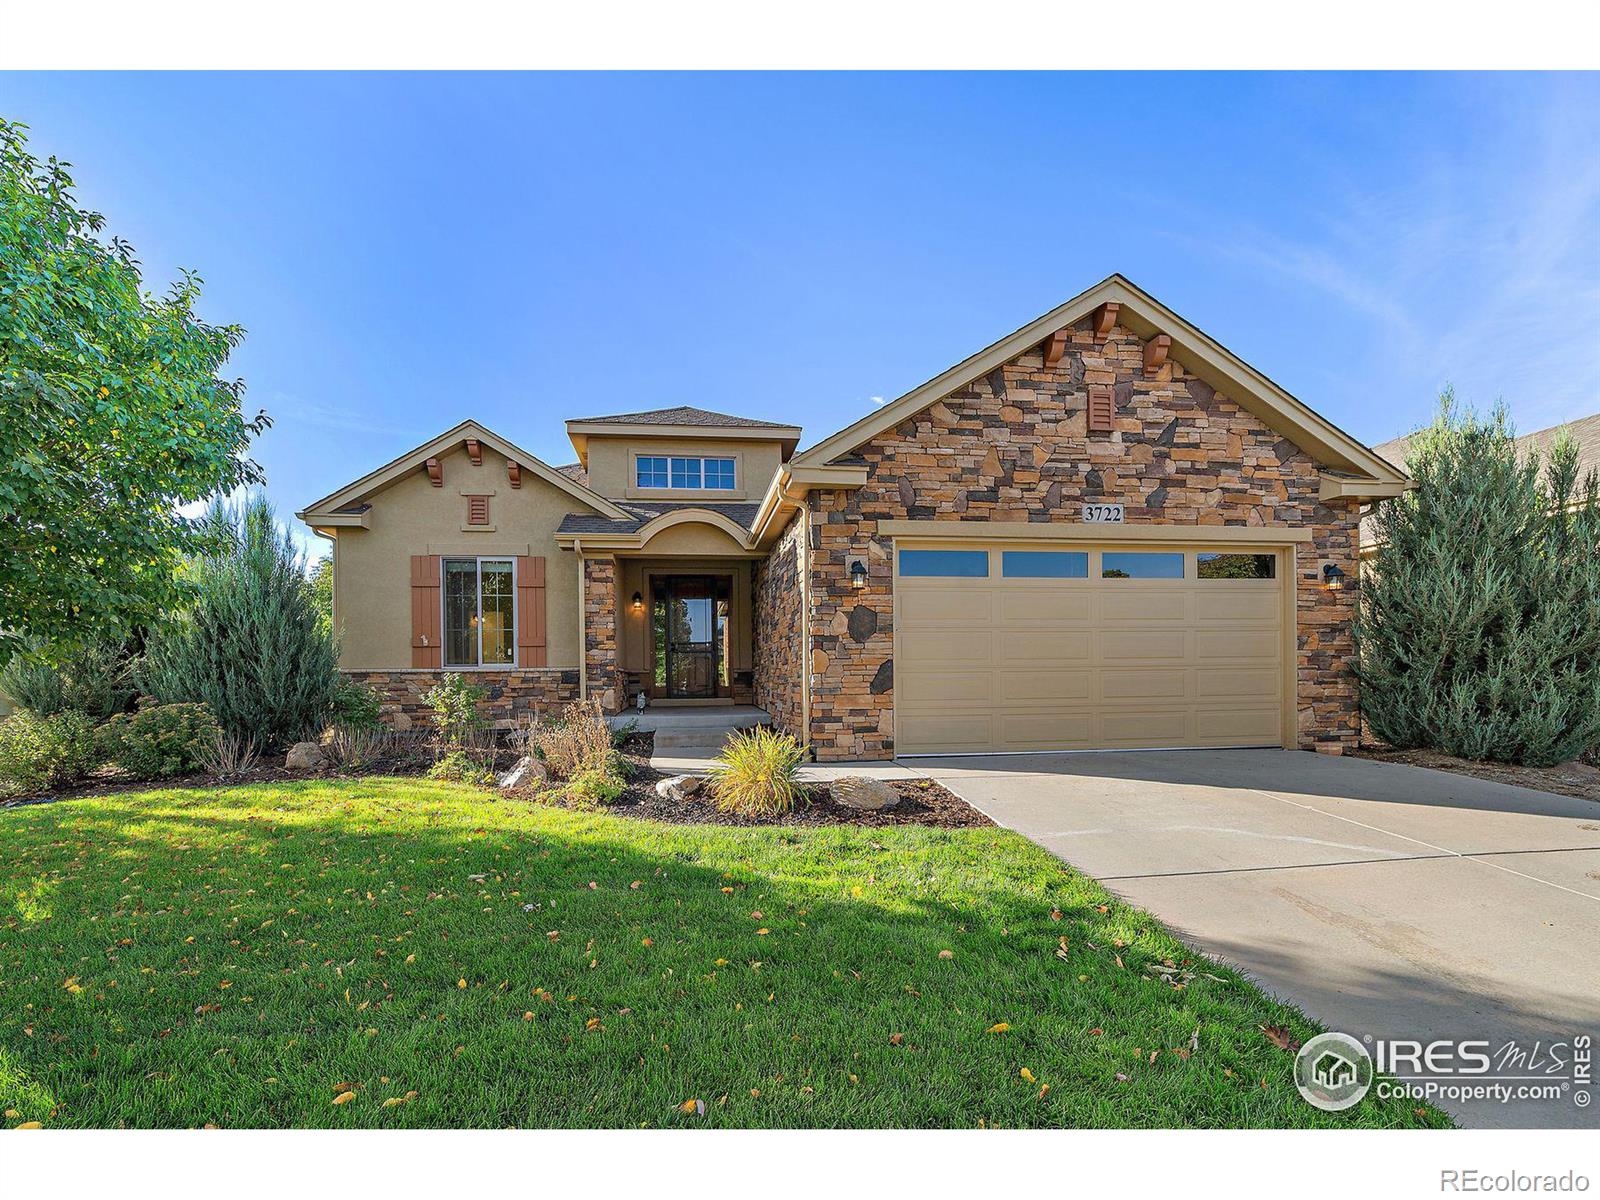 3722  jenny lane, Broomfield sold home. Closed on 2024-02-02 for $825,000.